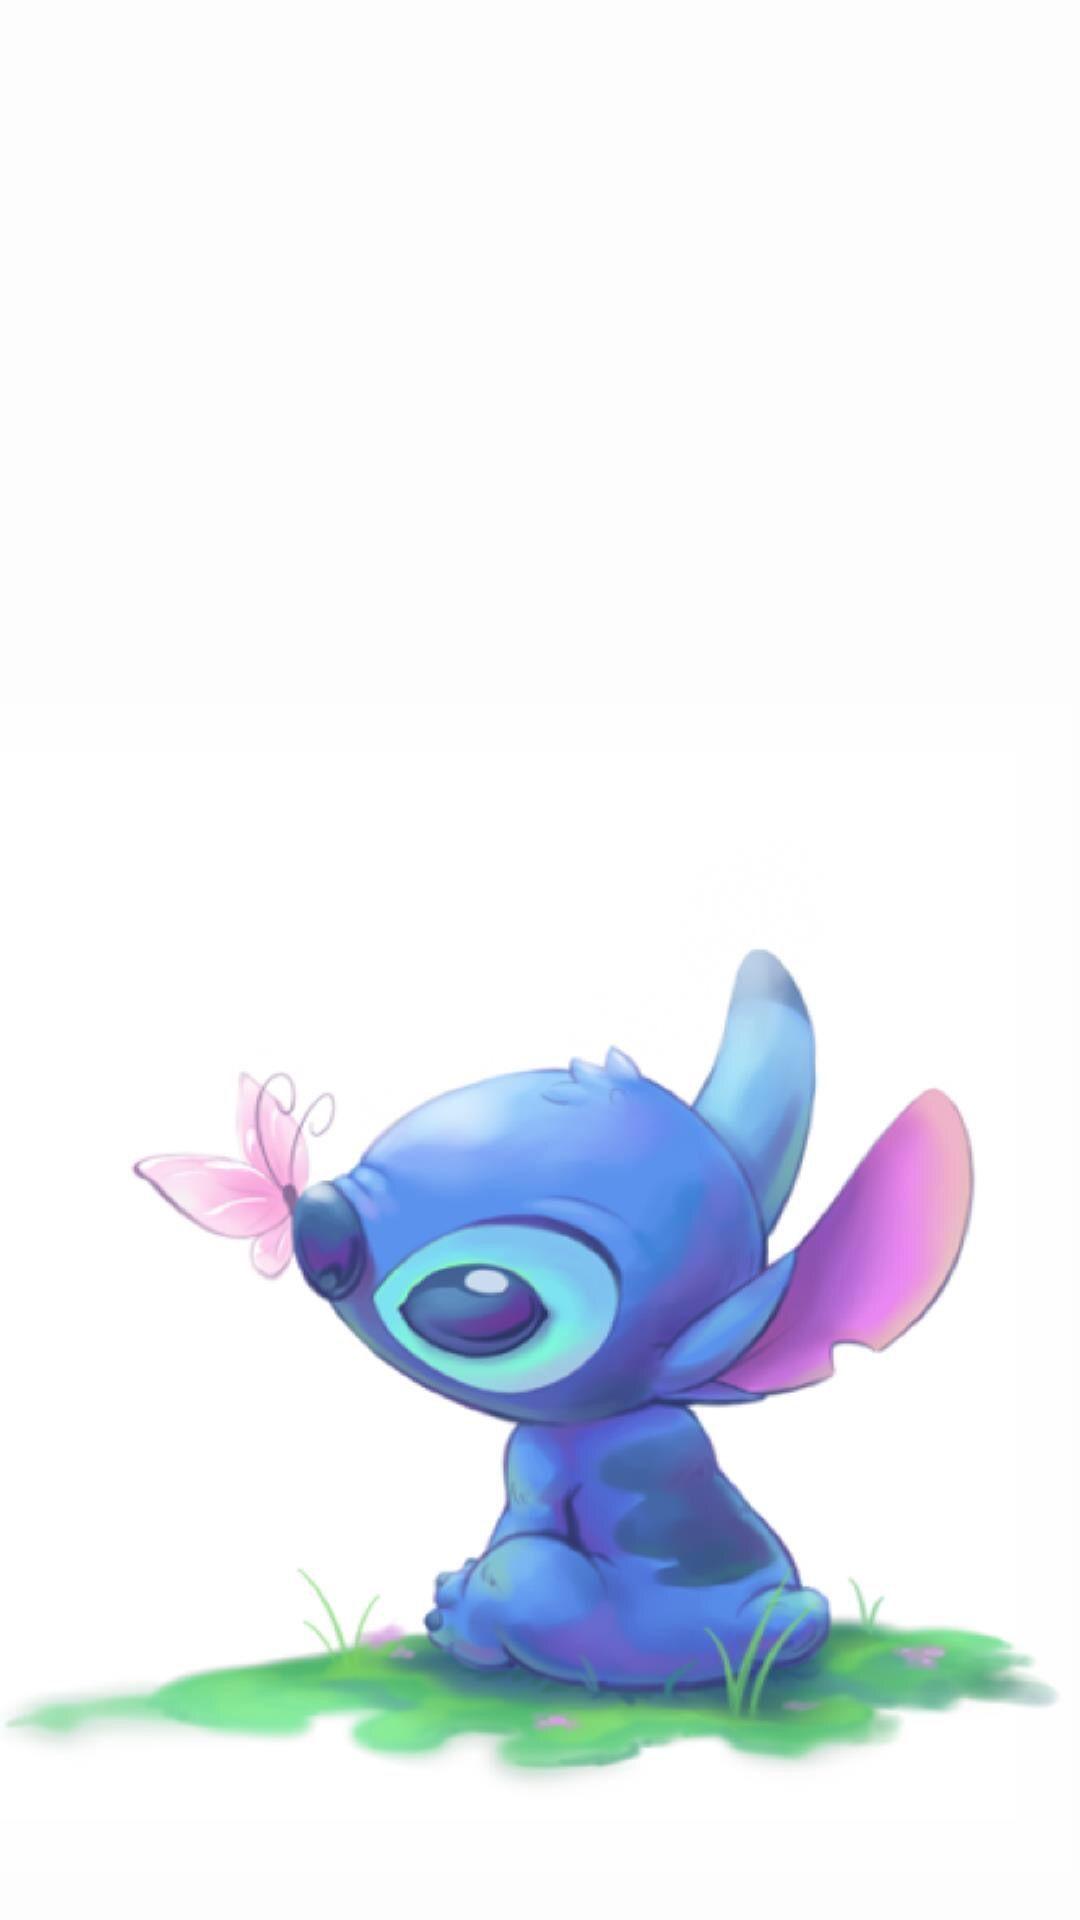 Stitch Valentines Wallpapers - Wallpaper Cave